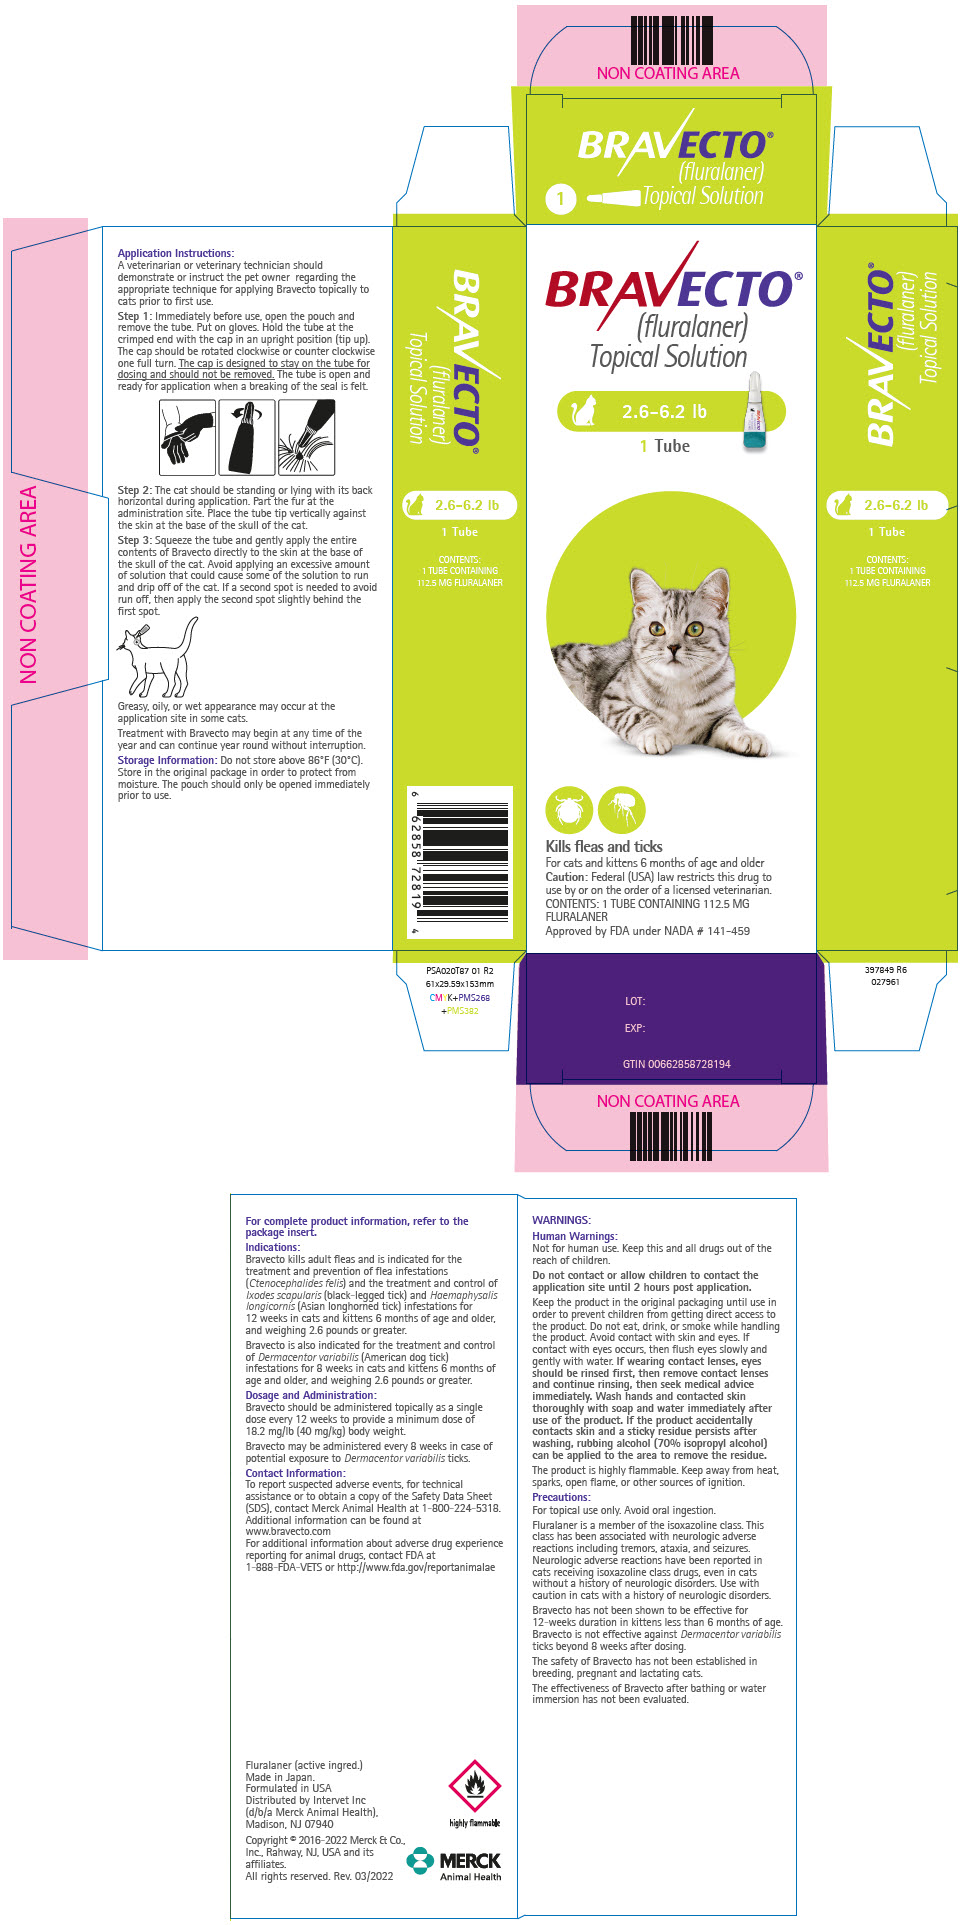 BRAVECTO® (fluralaner topical solution) for Cats